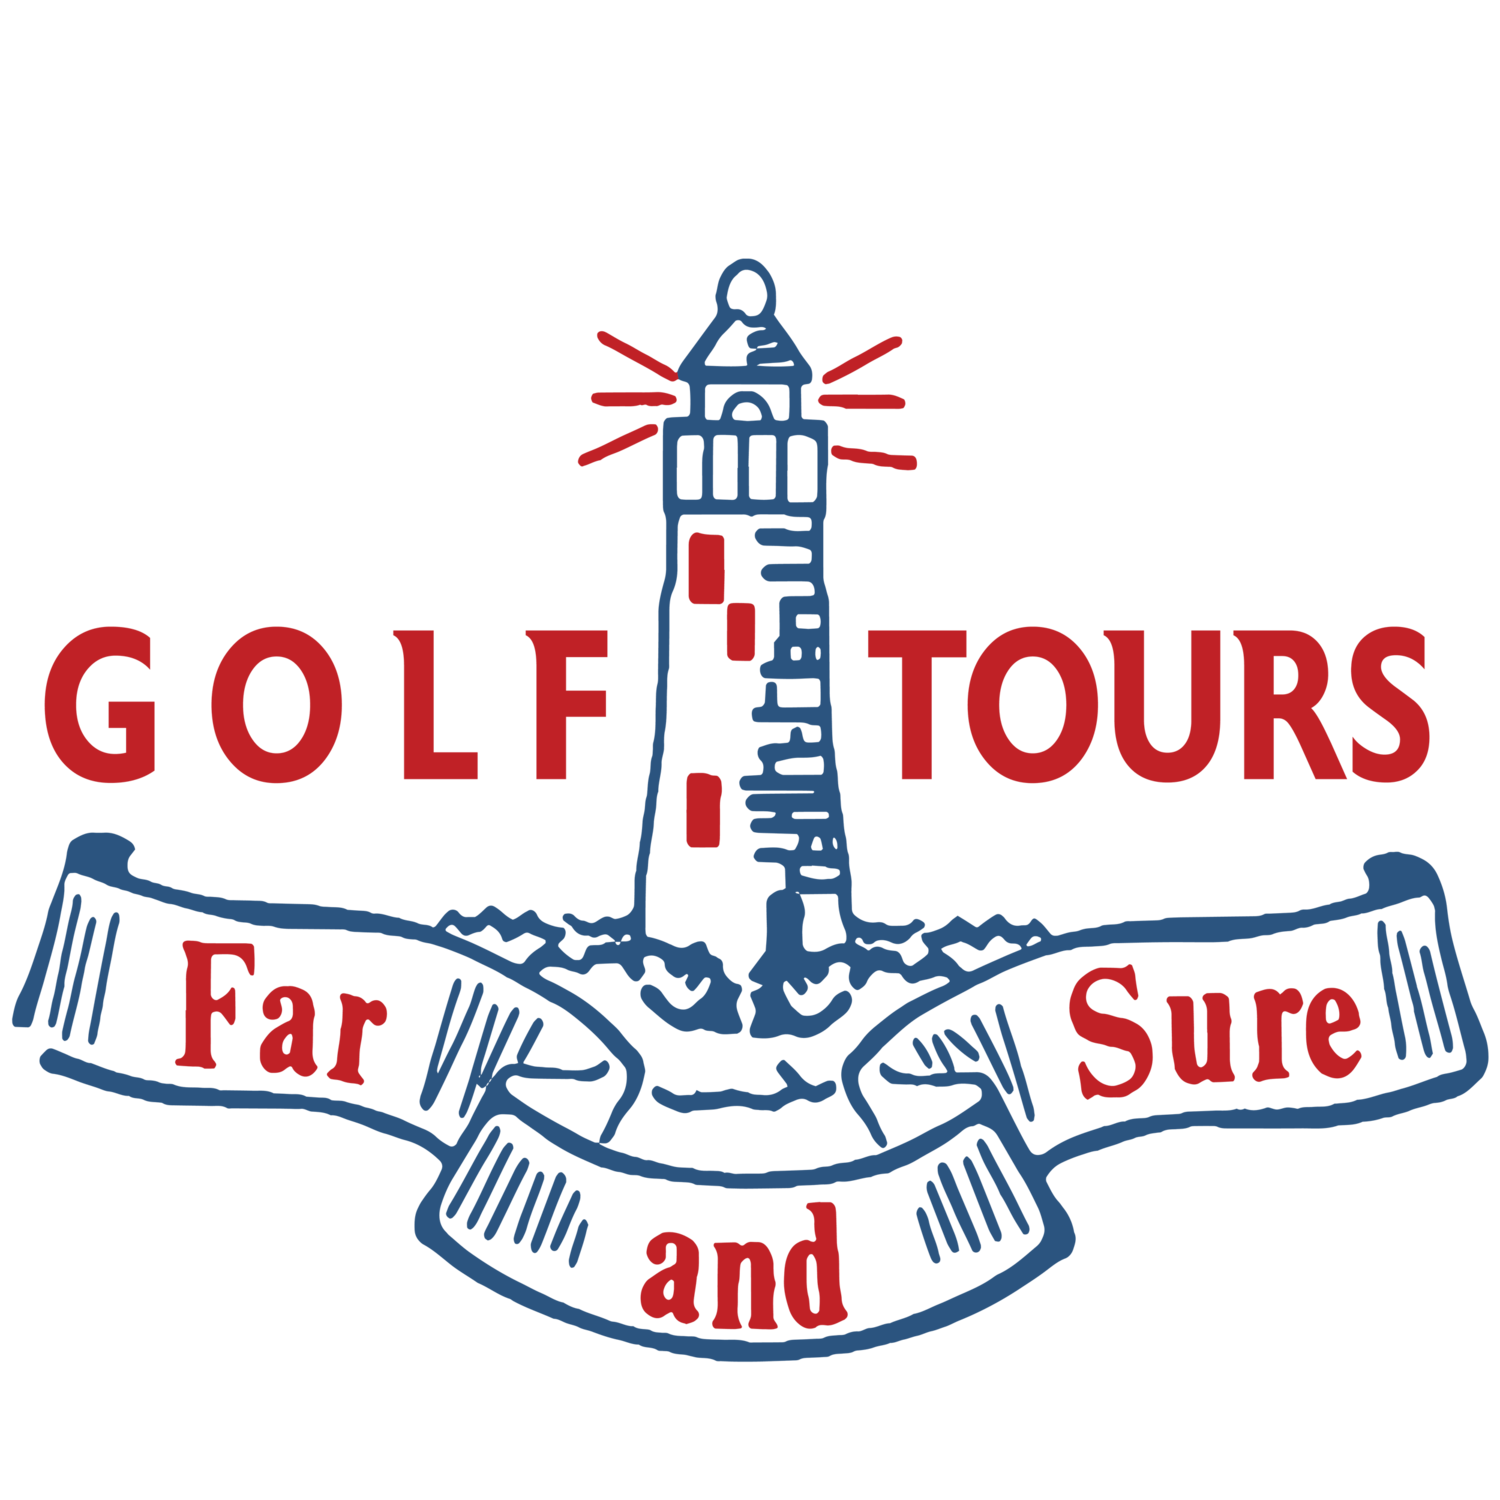 Far and Sure Golf Tours